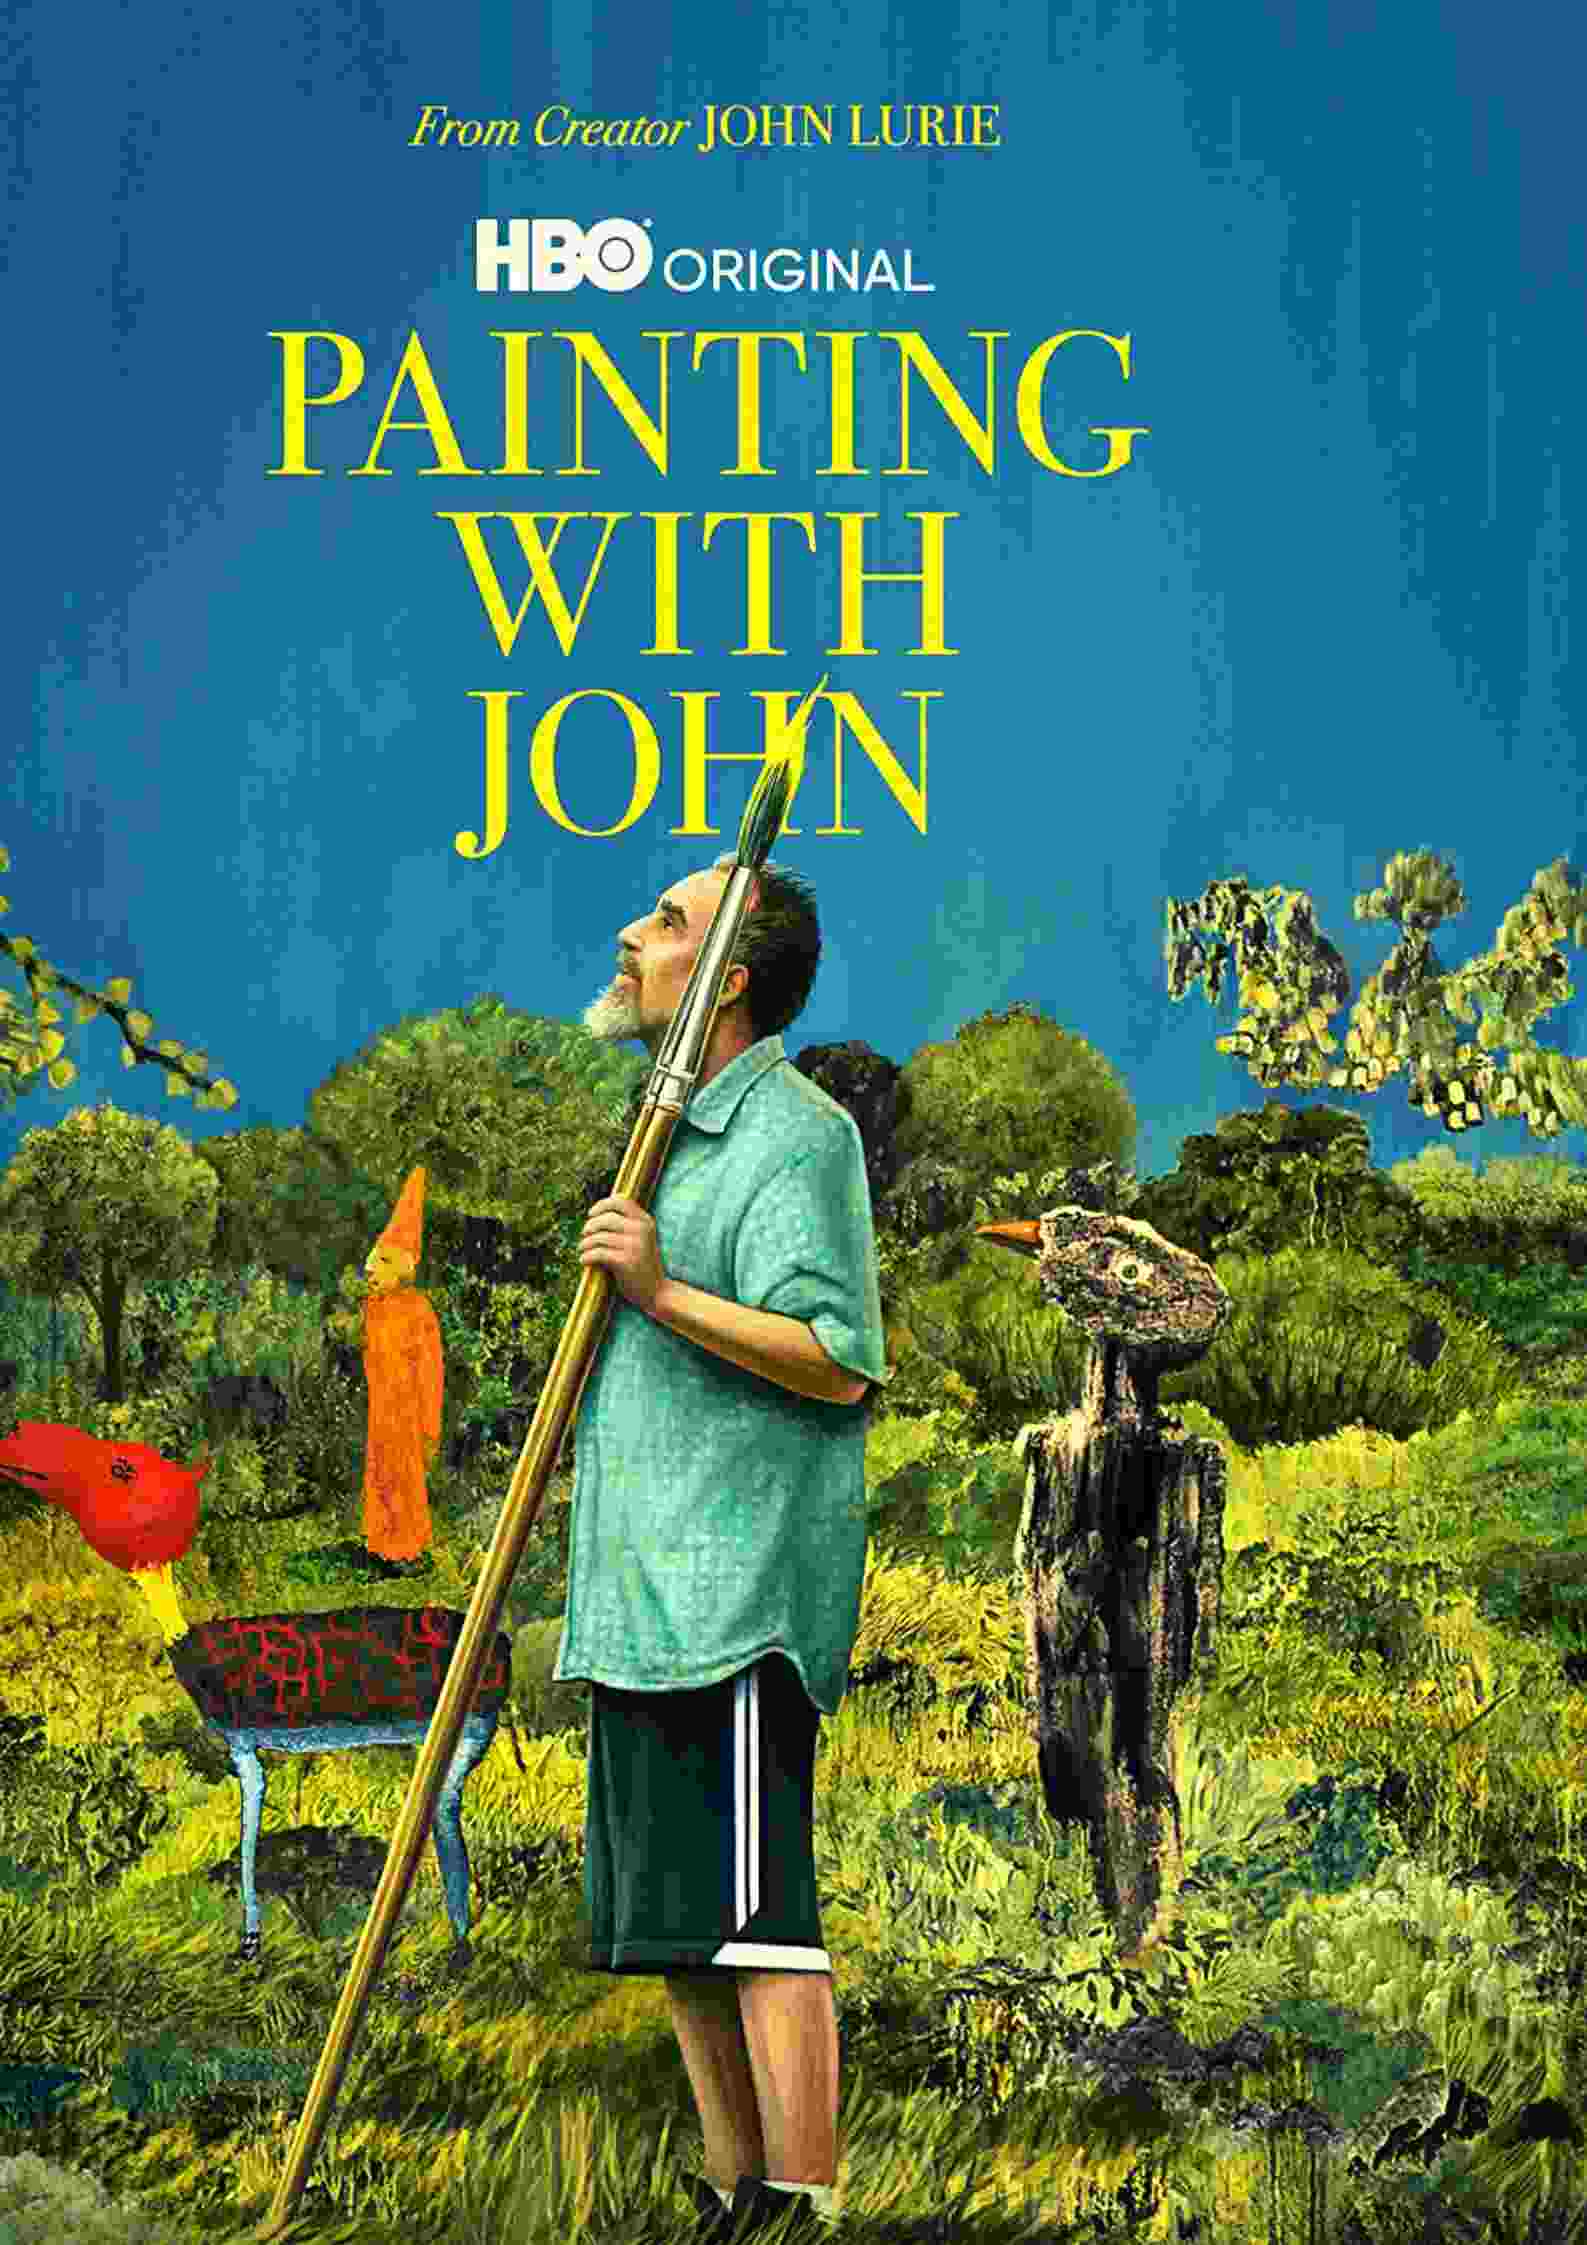 Painting with John parents guide and age rating | 2022